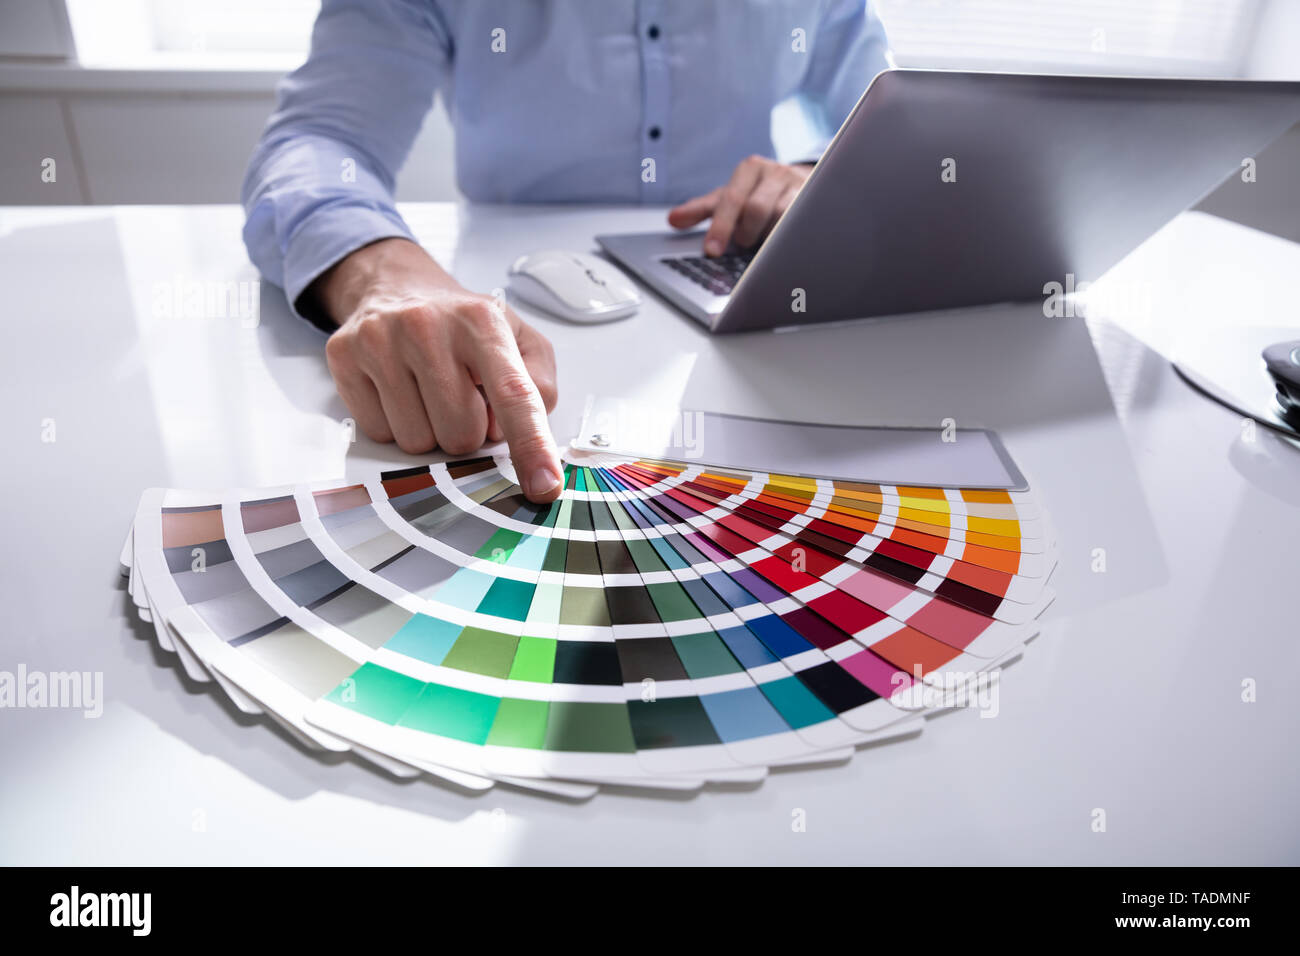 Cropped image of male designer holding color swatches while using laptop at desk Stock Photo